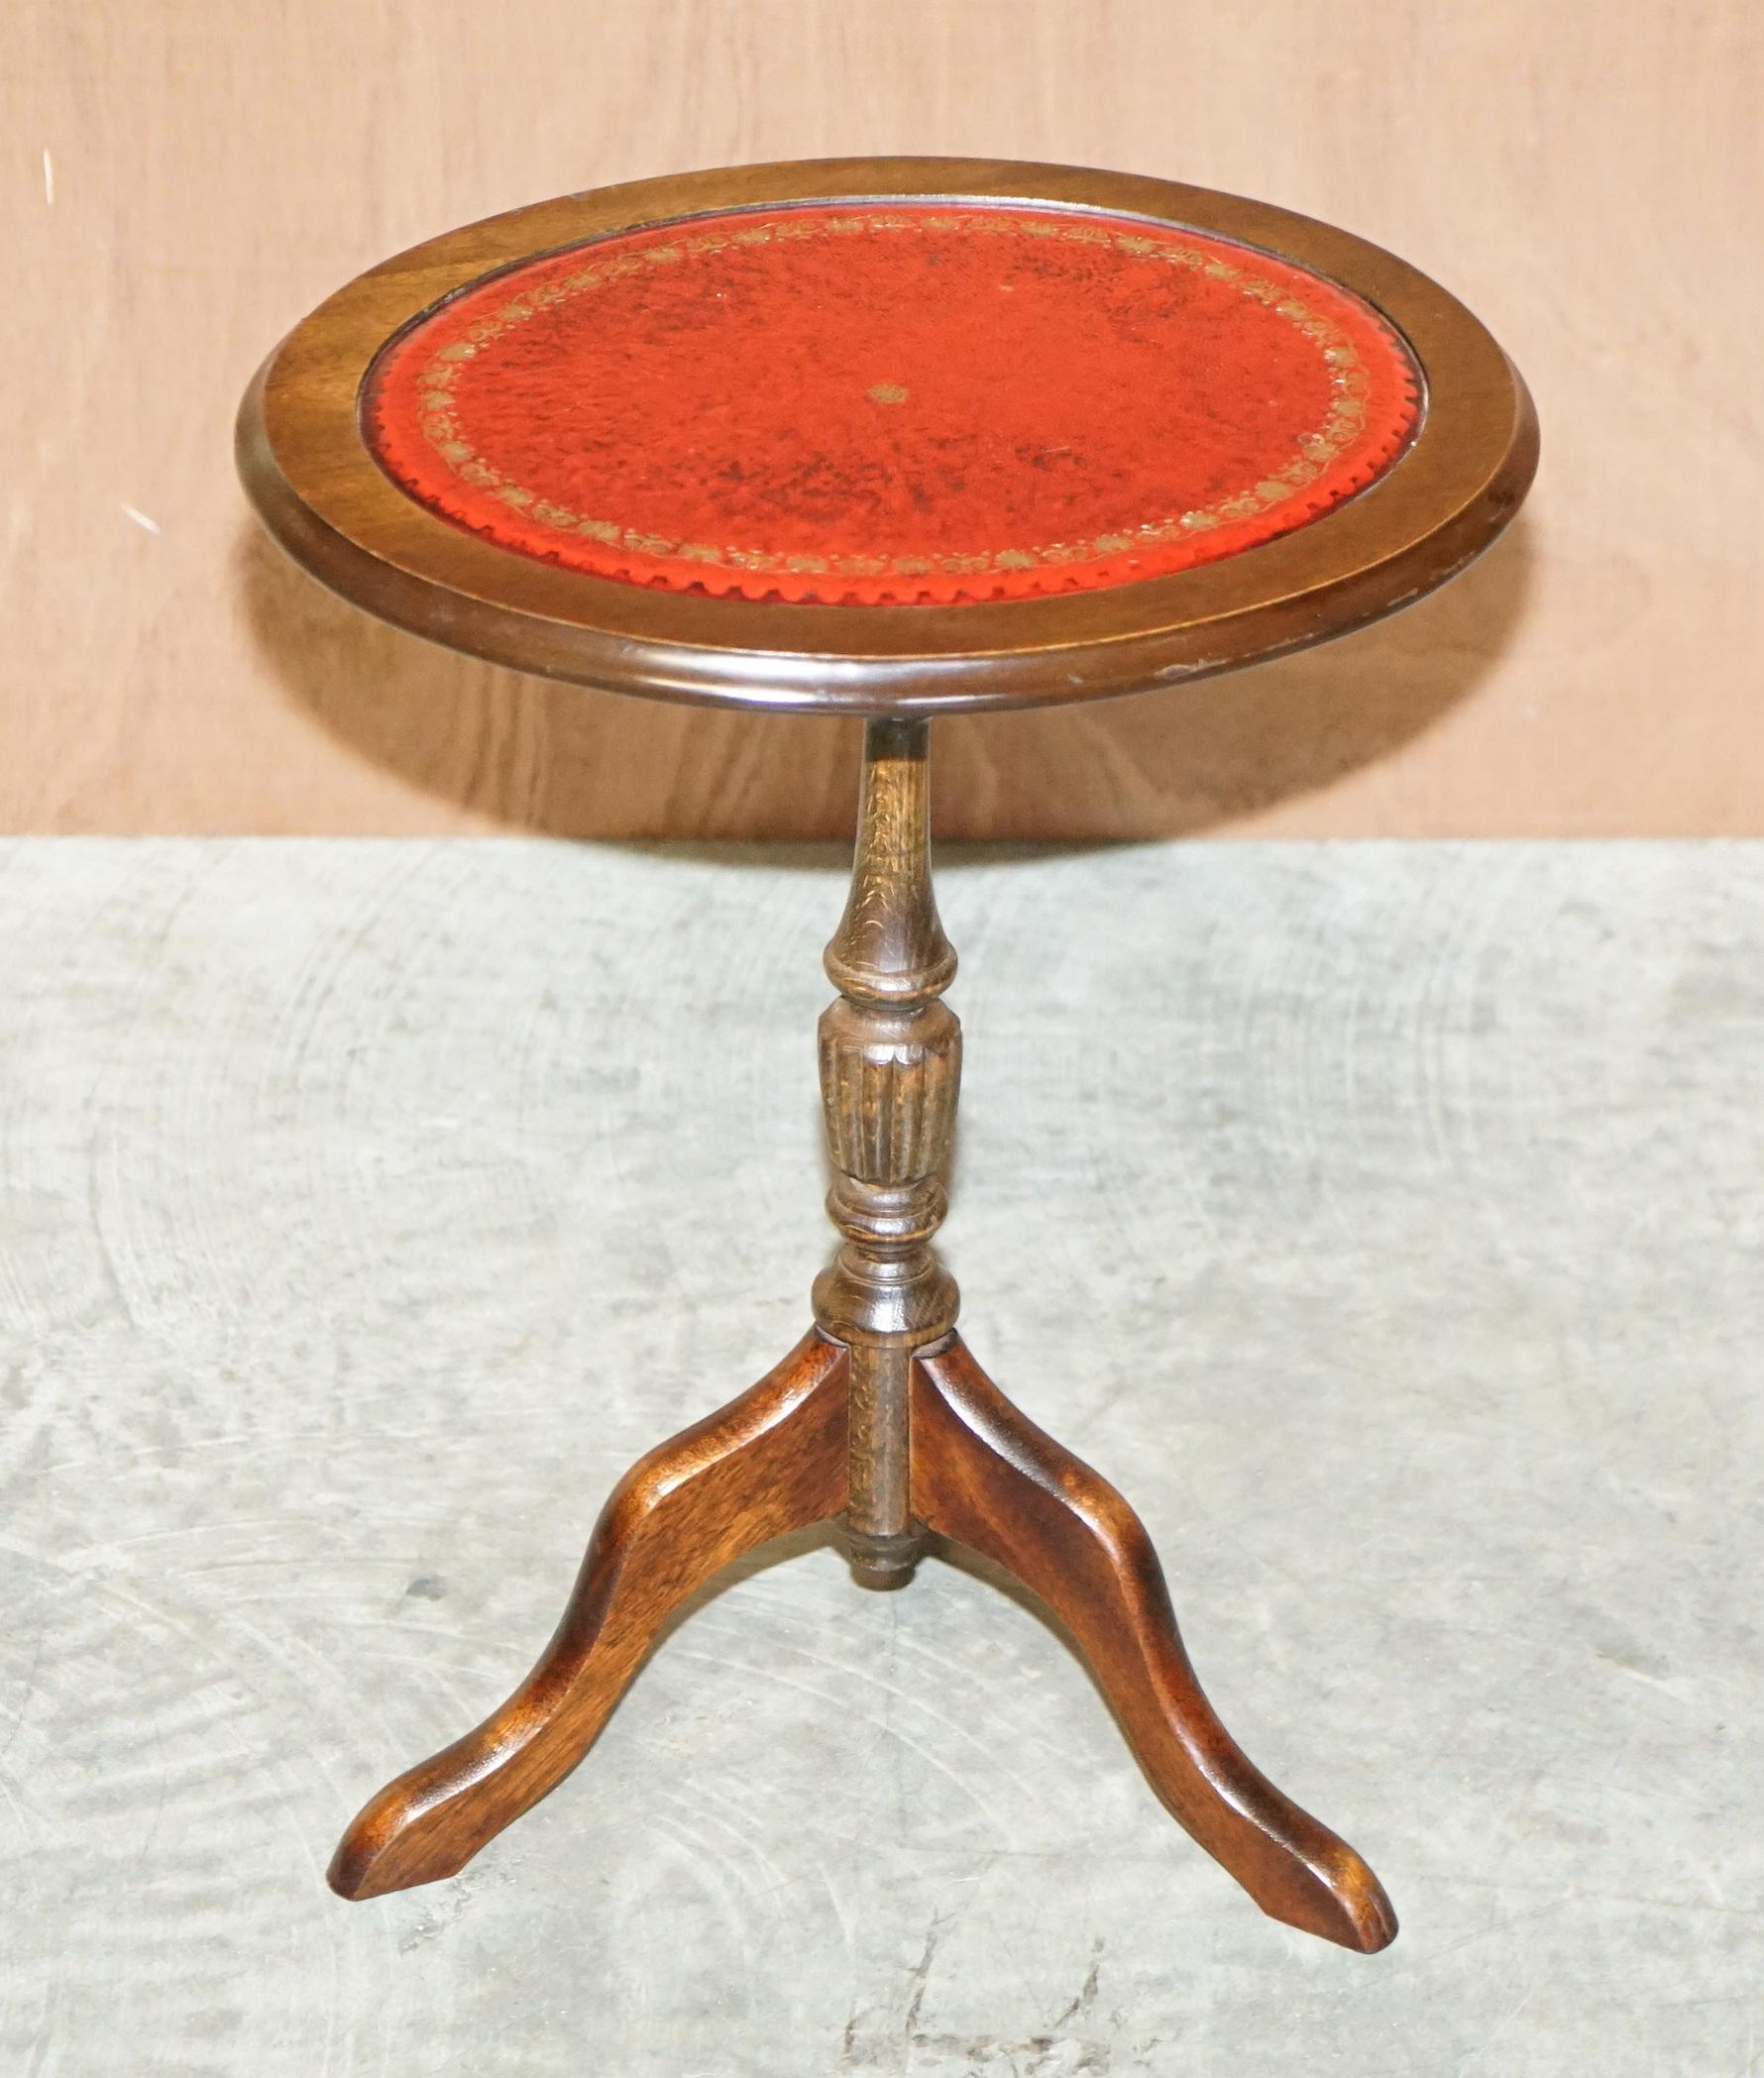 We are delighted to offer for sale this very nice vintage Bevan Funnell mahogany & oxblood topped tripod table

A good looking and well made piece, ideally suited for a lamp or glass of wine with a picture frame on it

It has been cleaned waxed